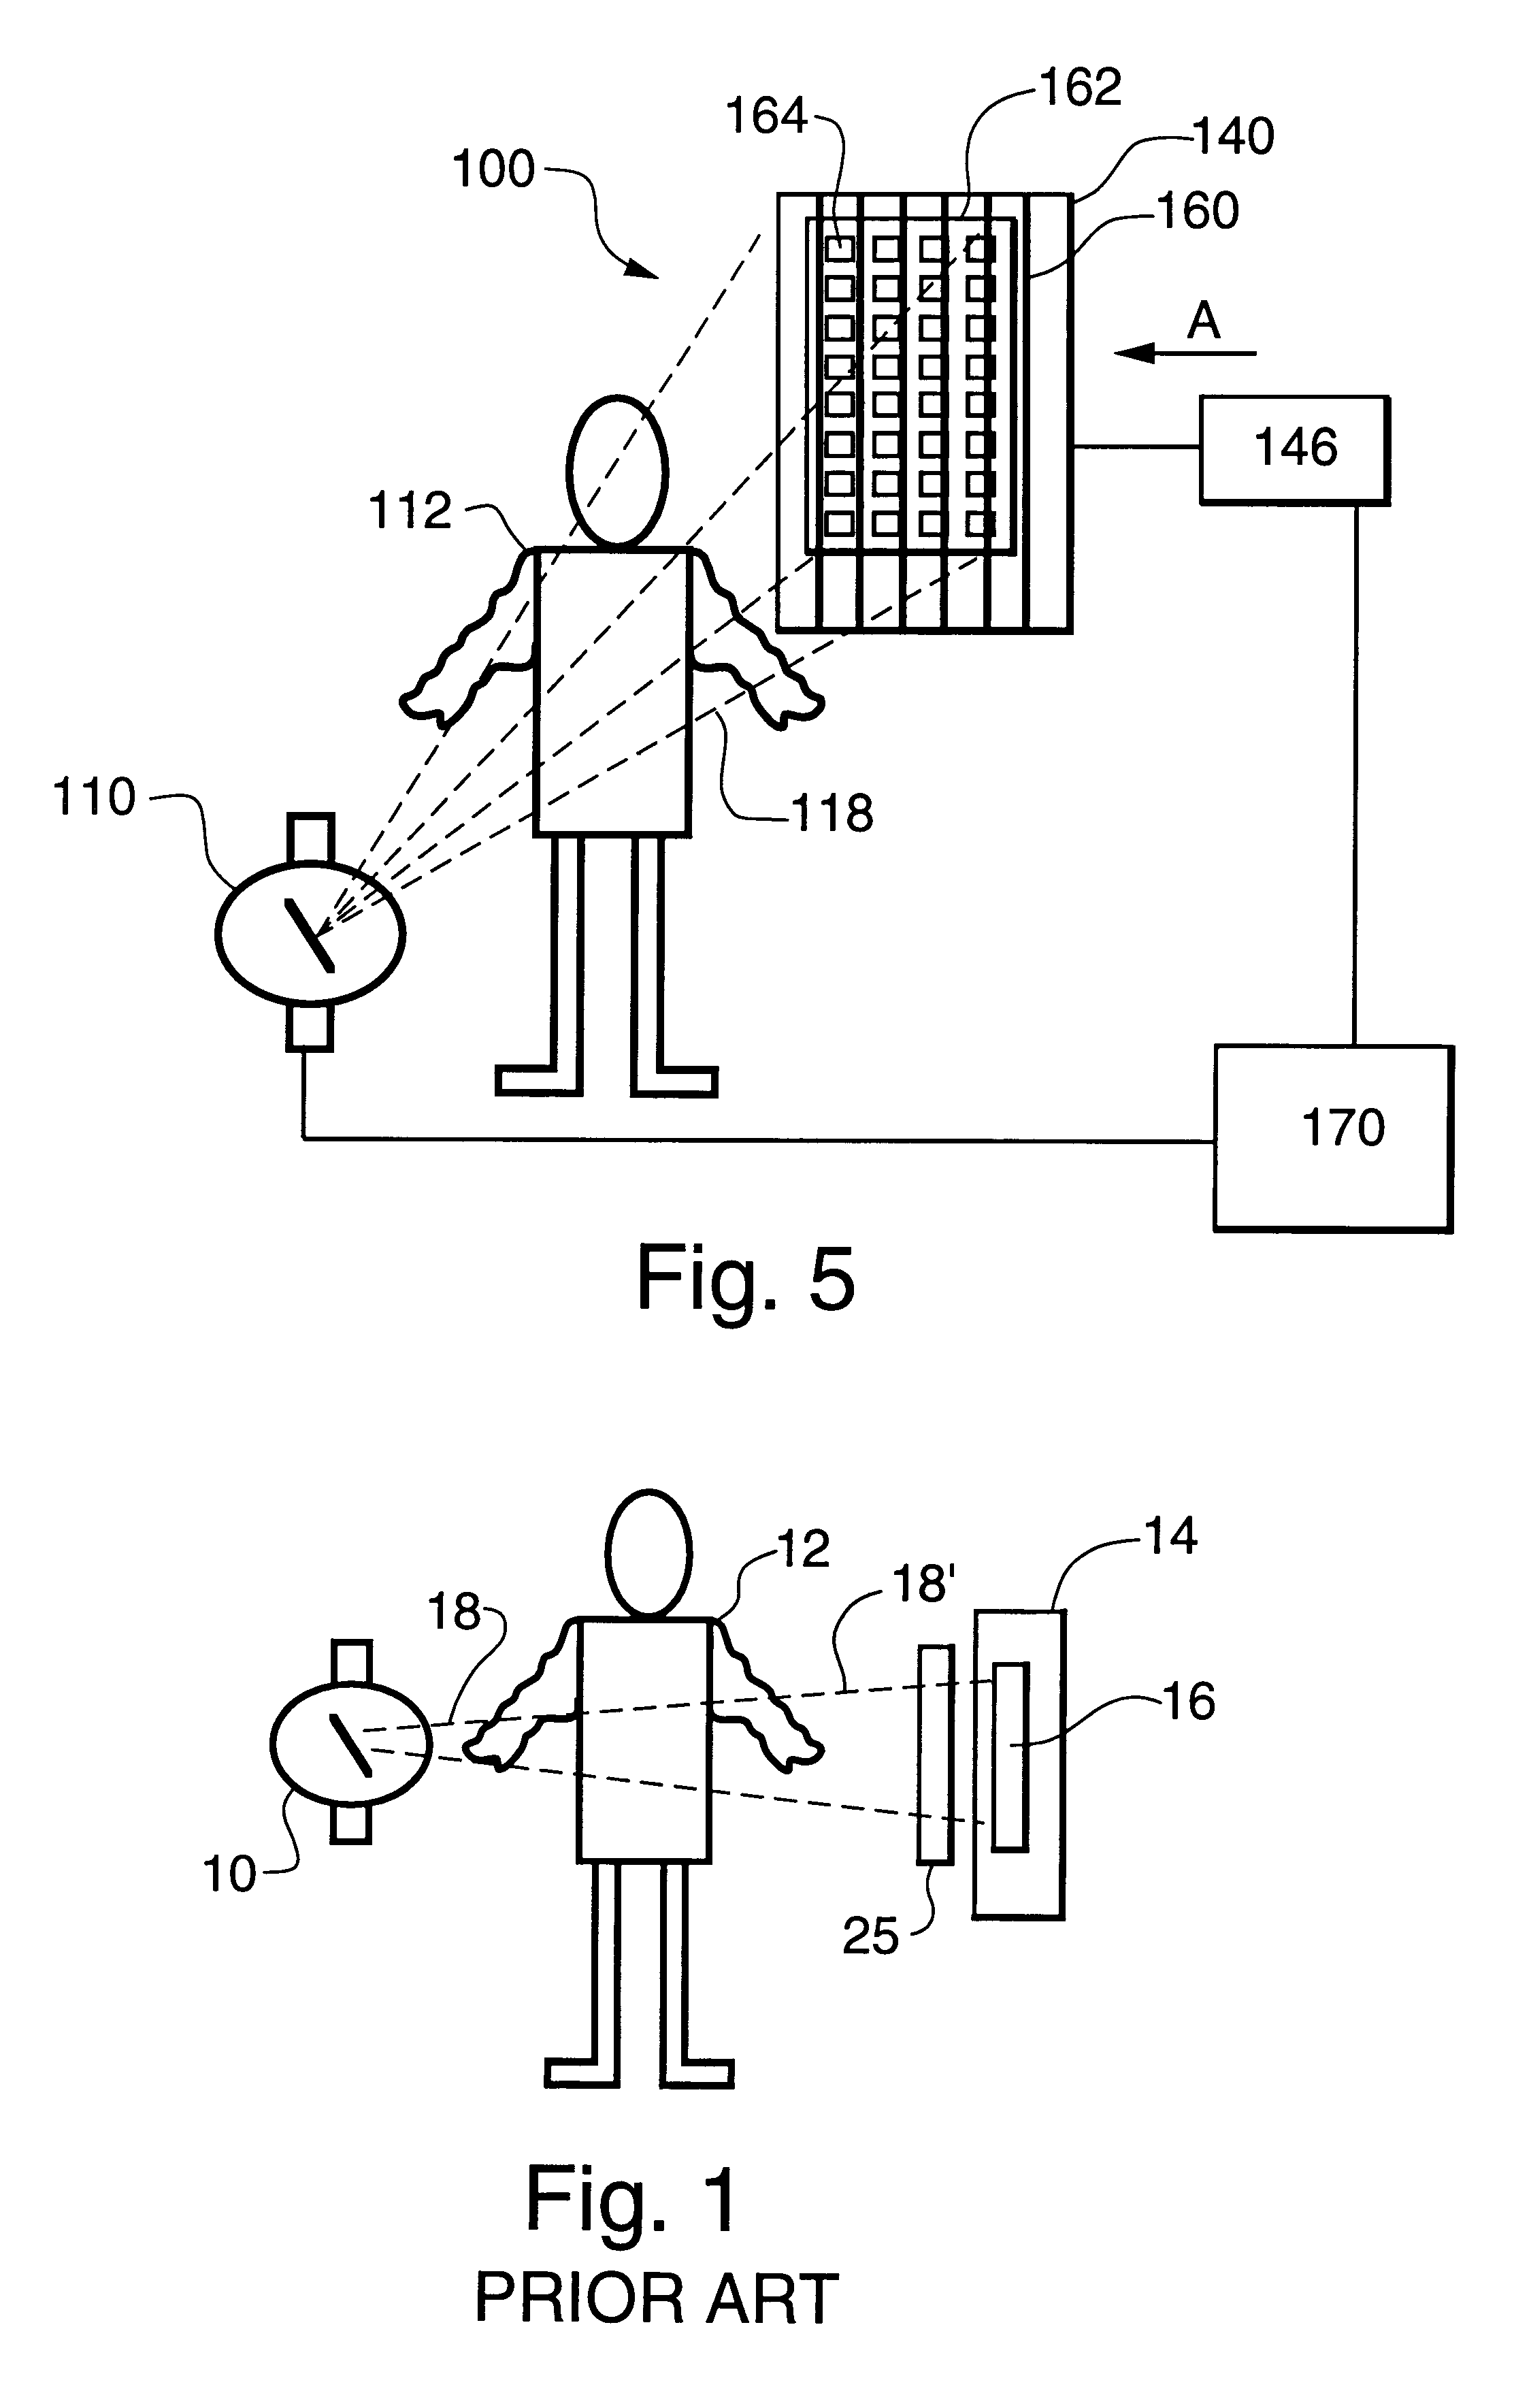 Single-stroke radiation anti-scatter device for x-ray exposure window